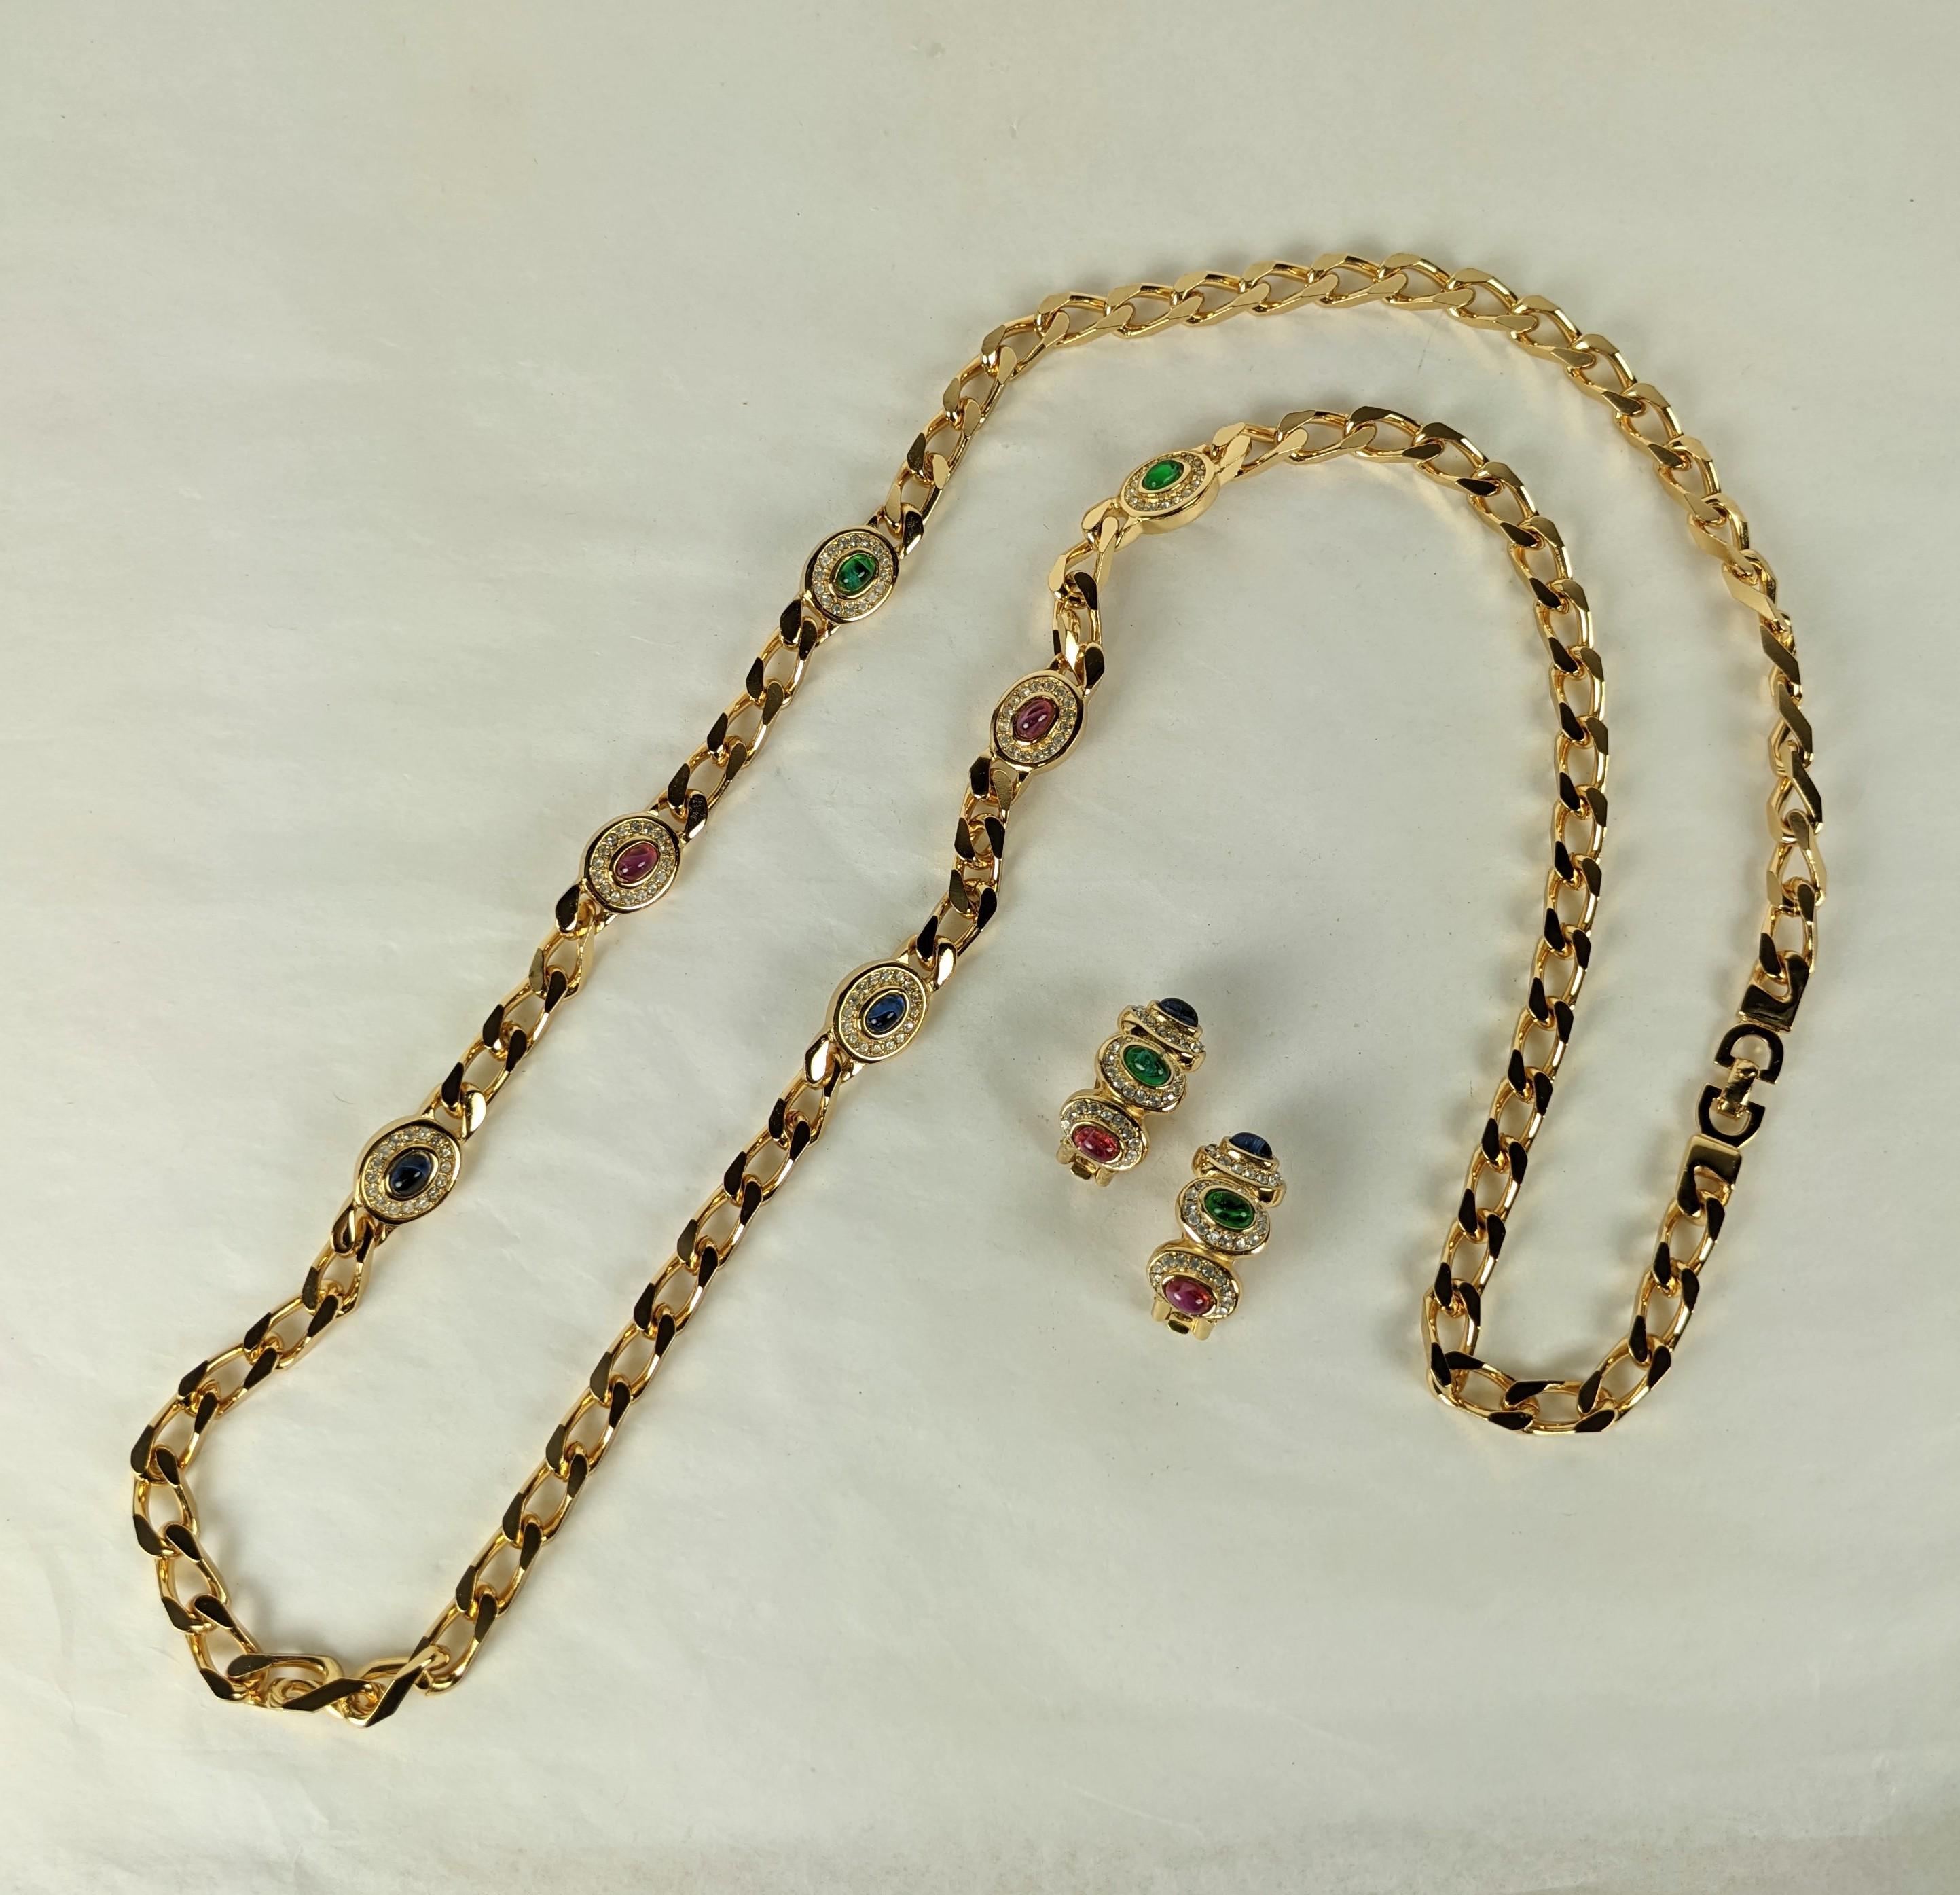 Elegant Christian Dior Gem Station Chain and Ear Clips from the 1980's. Gilt curb chain with pave stations of faux ruby, emerald and sapphire cabs. Stations are reversible on both sides.
Clip earrings with matching cabochons.  1980's Dior, France.